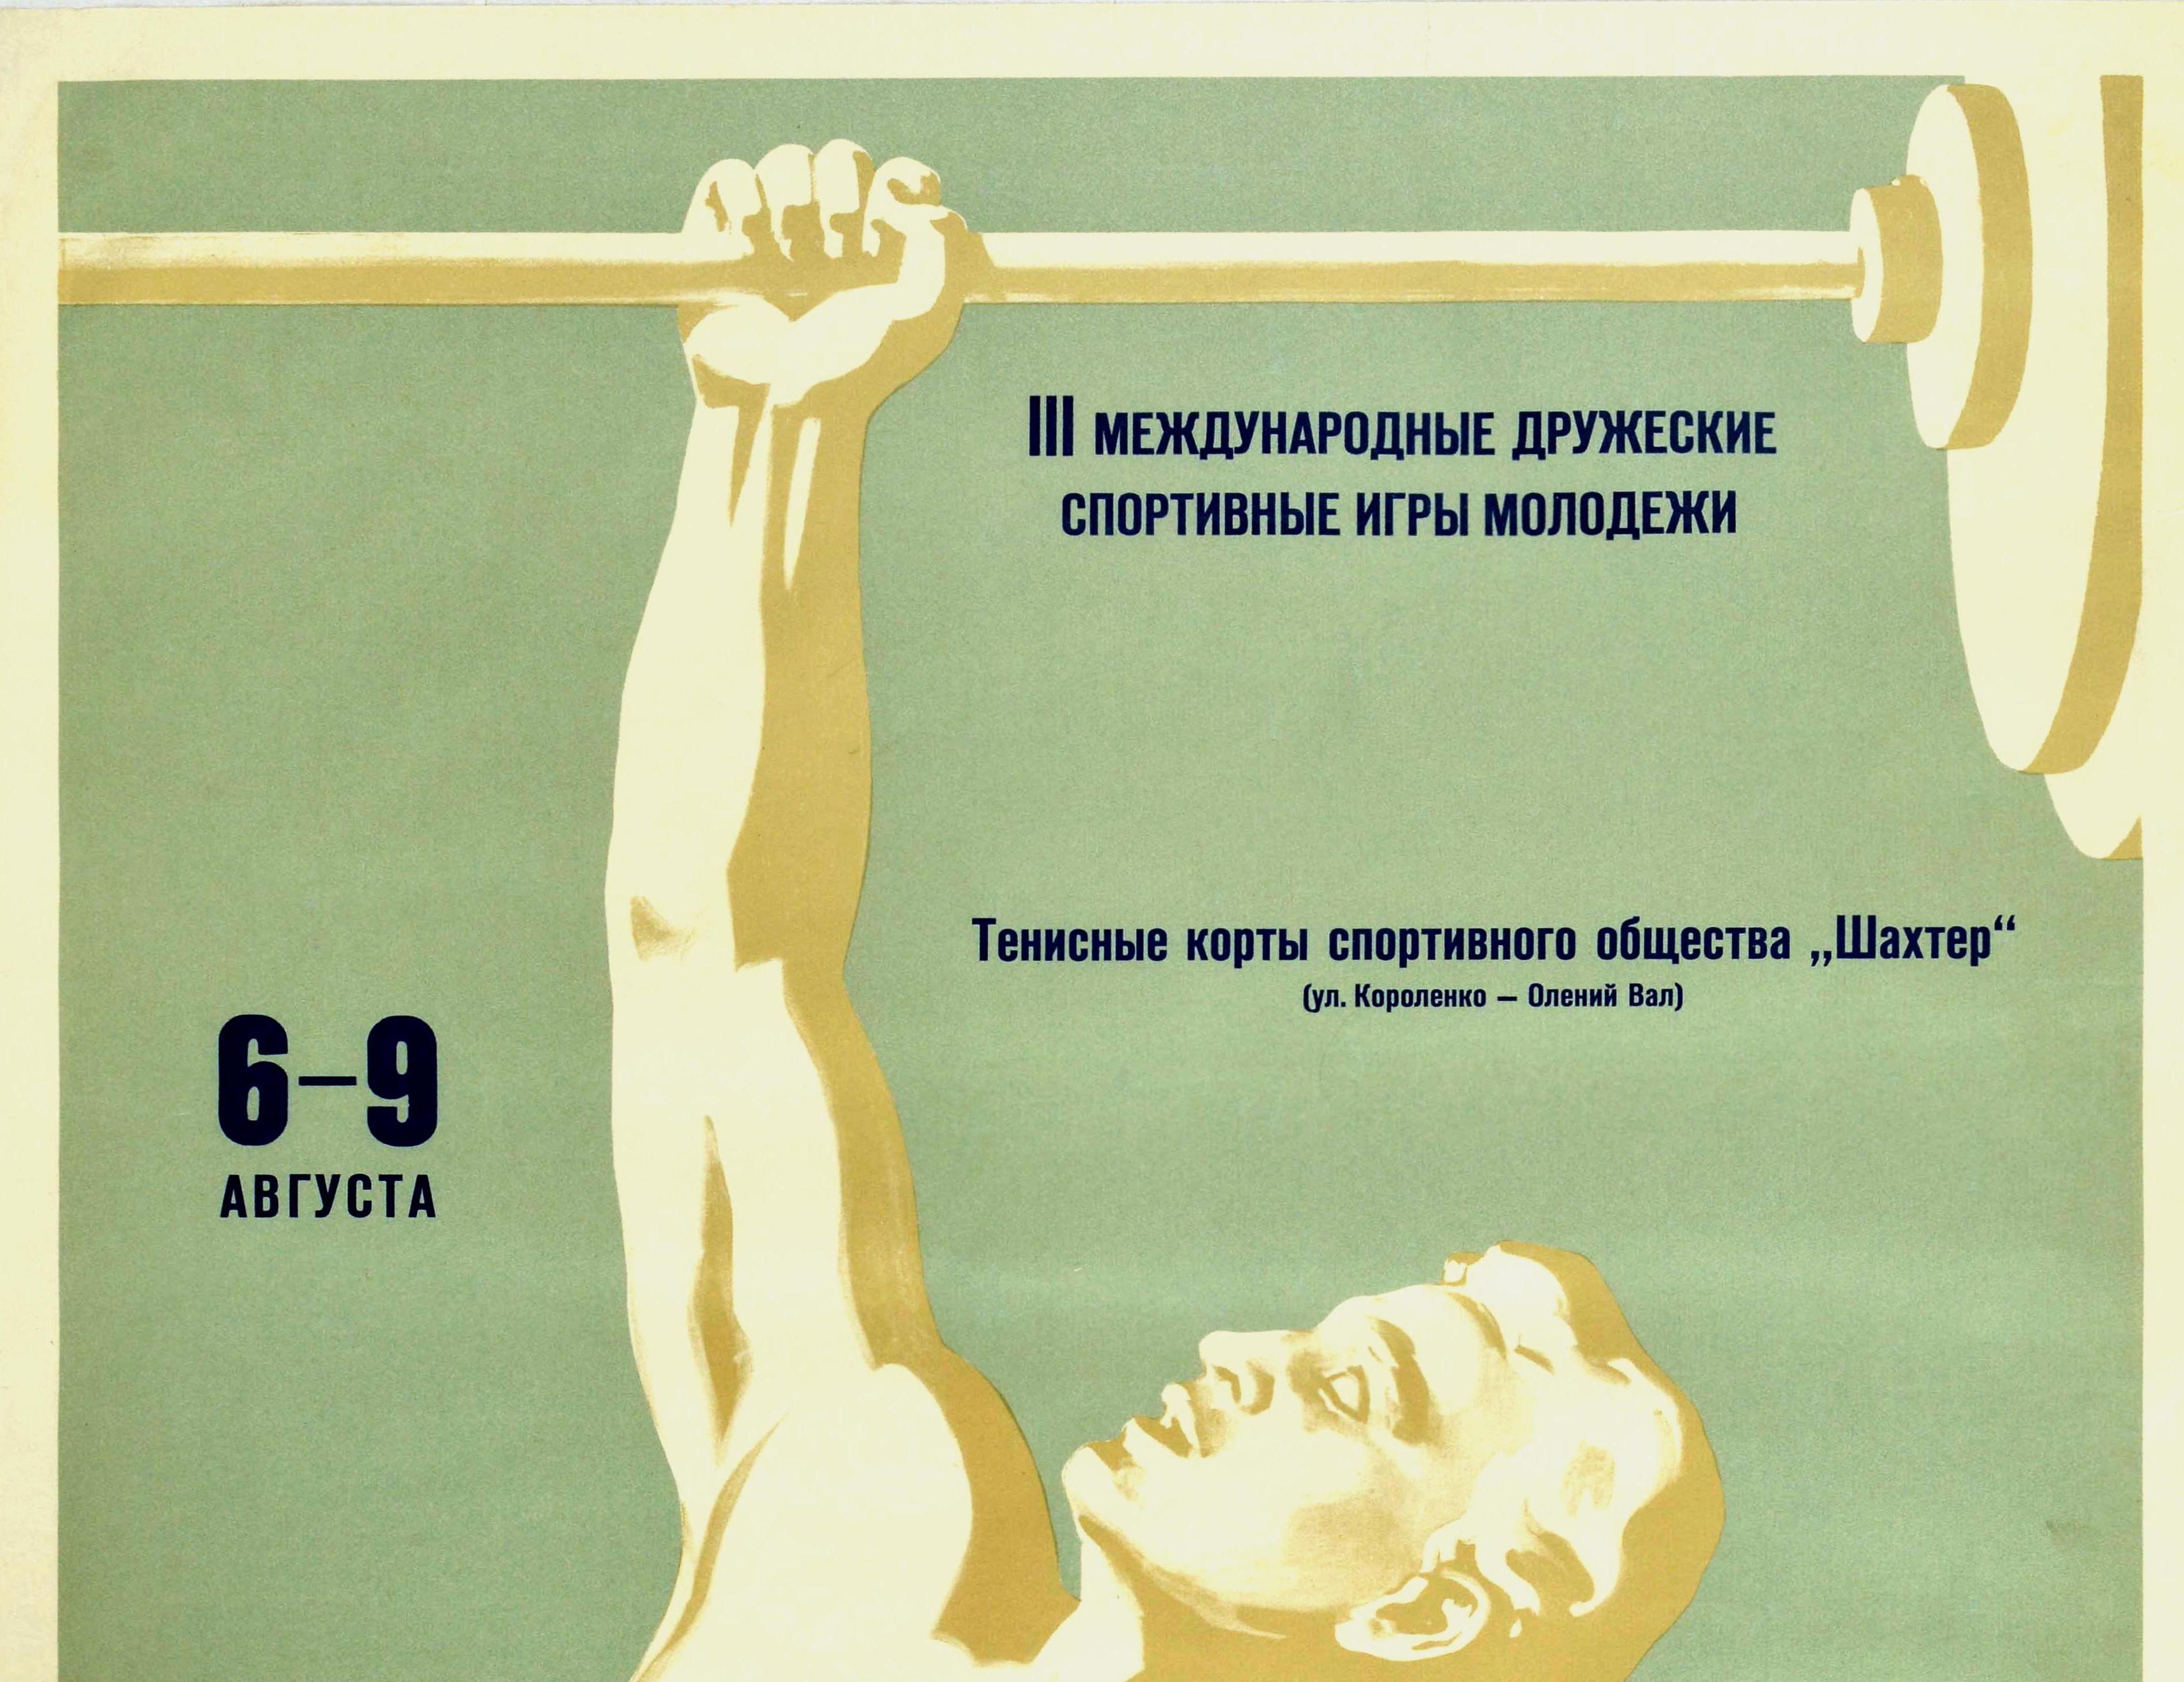 Original vintage sport poster for a weightlifting competition at the III International Friendship Moscow Youth Games held from 6-9 August 1957 at the tennis courts of the Shakhter / Miner Sports Society on Korolenko Ulitsa / Street featuring a